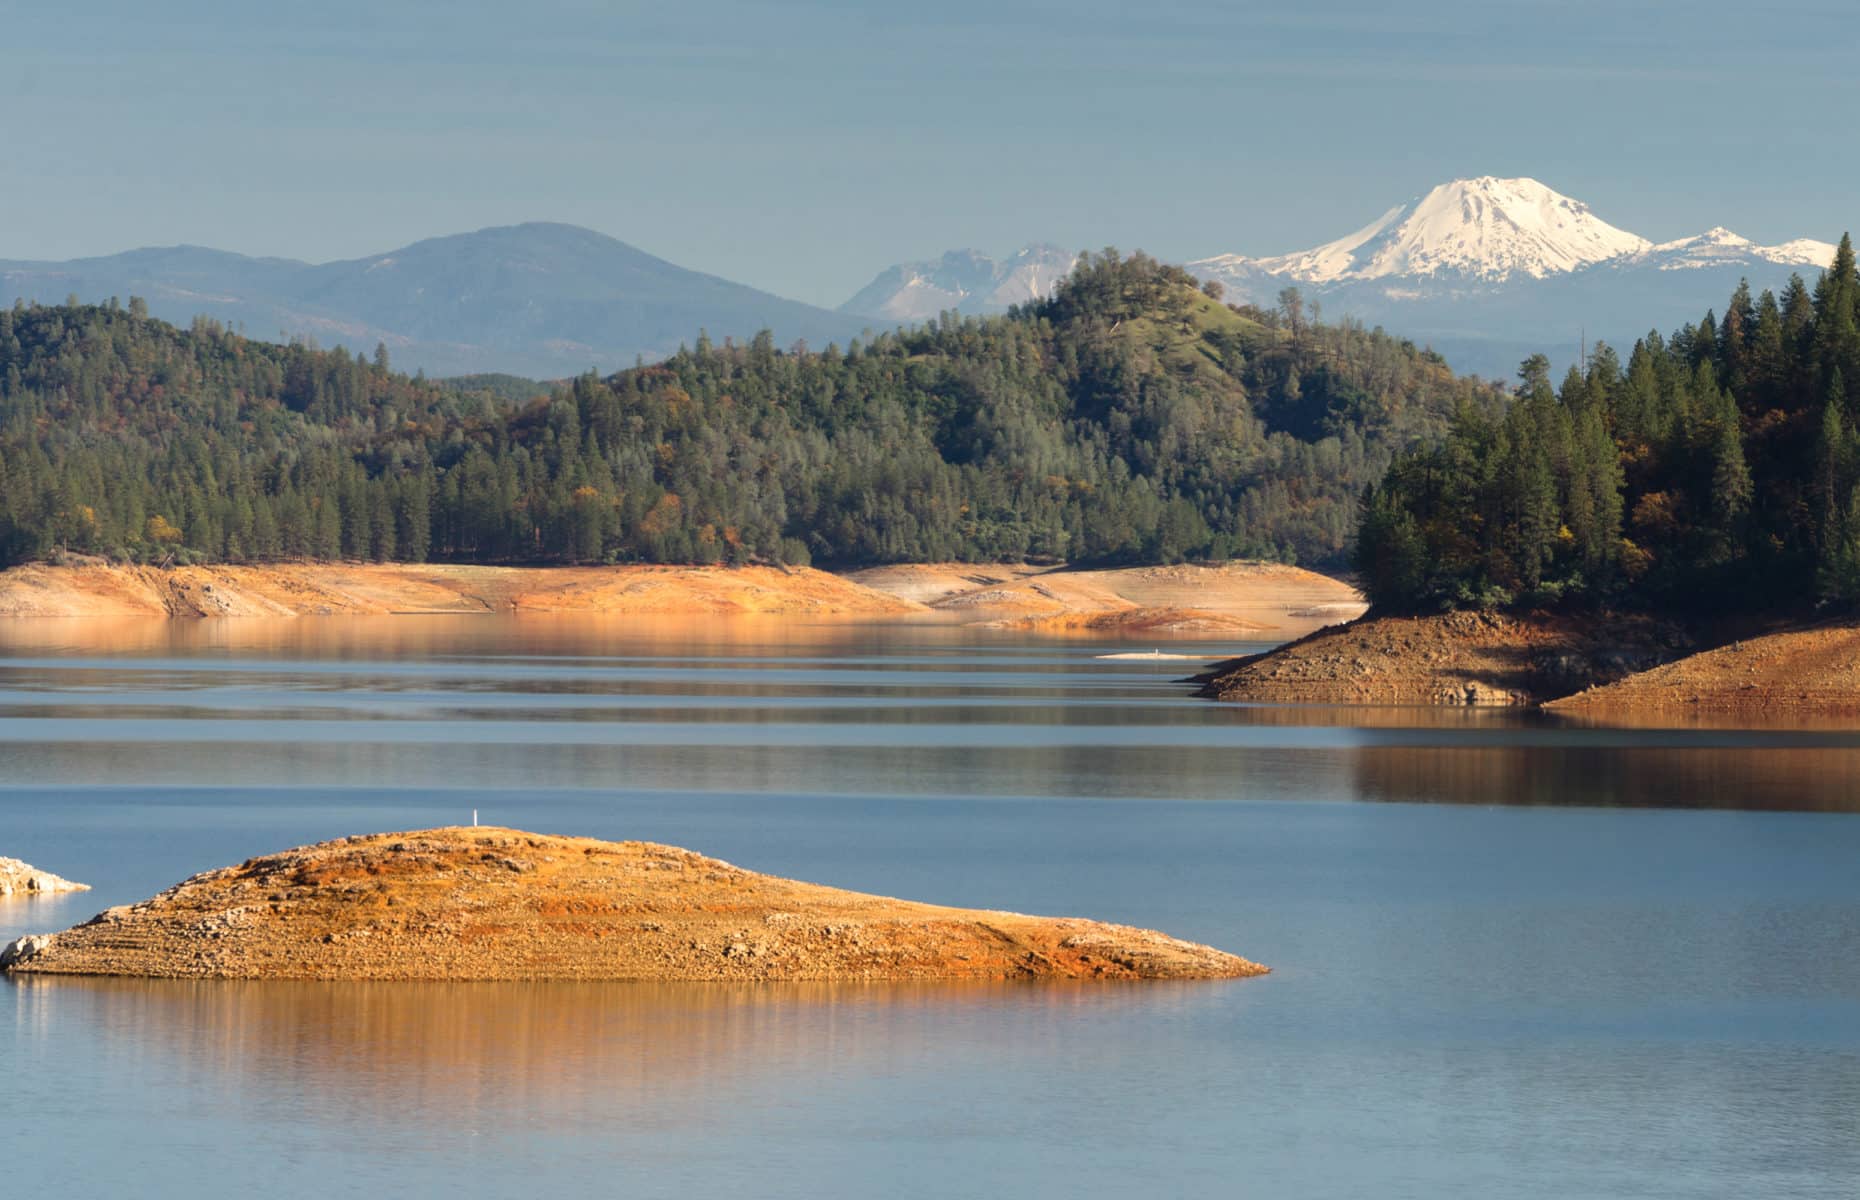 Water level is low at Lake Shasta in Northern California